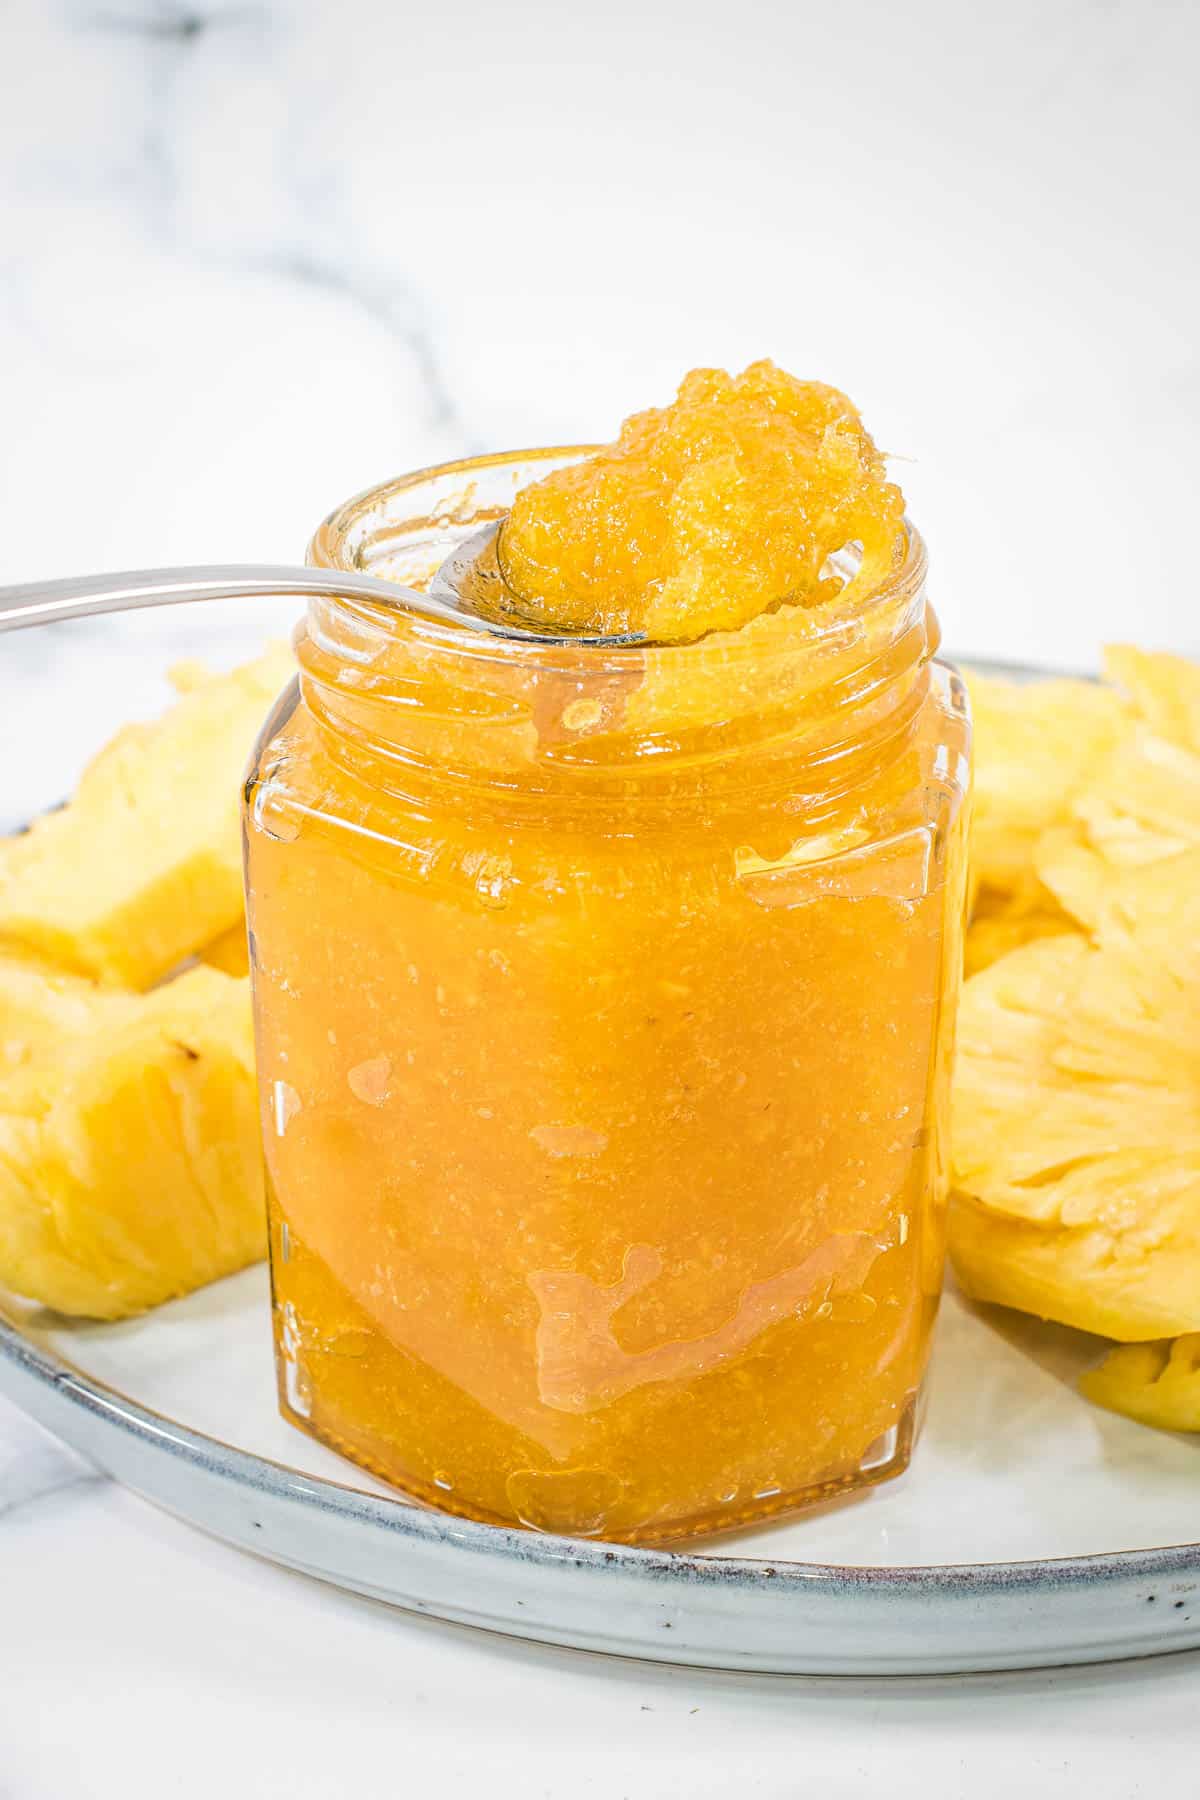 Pineapple jam in a spoon over a glass jar of jam